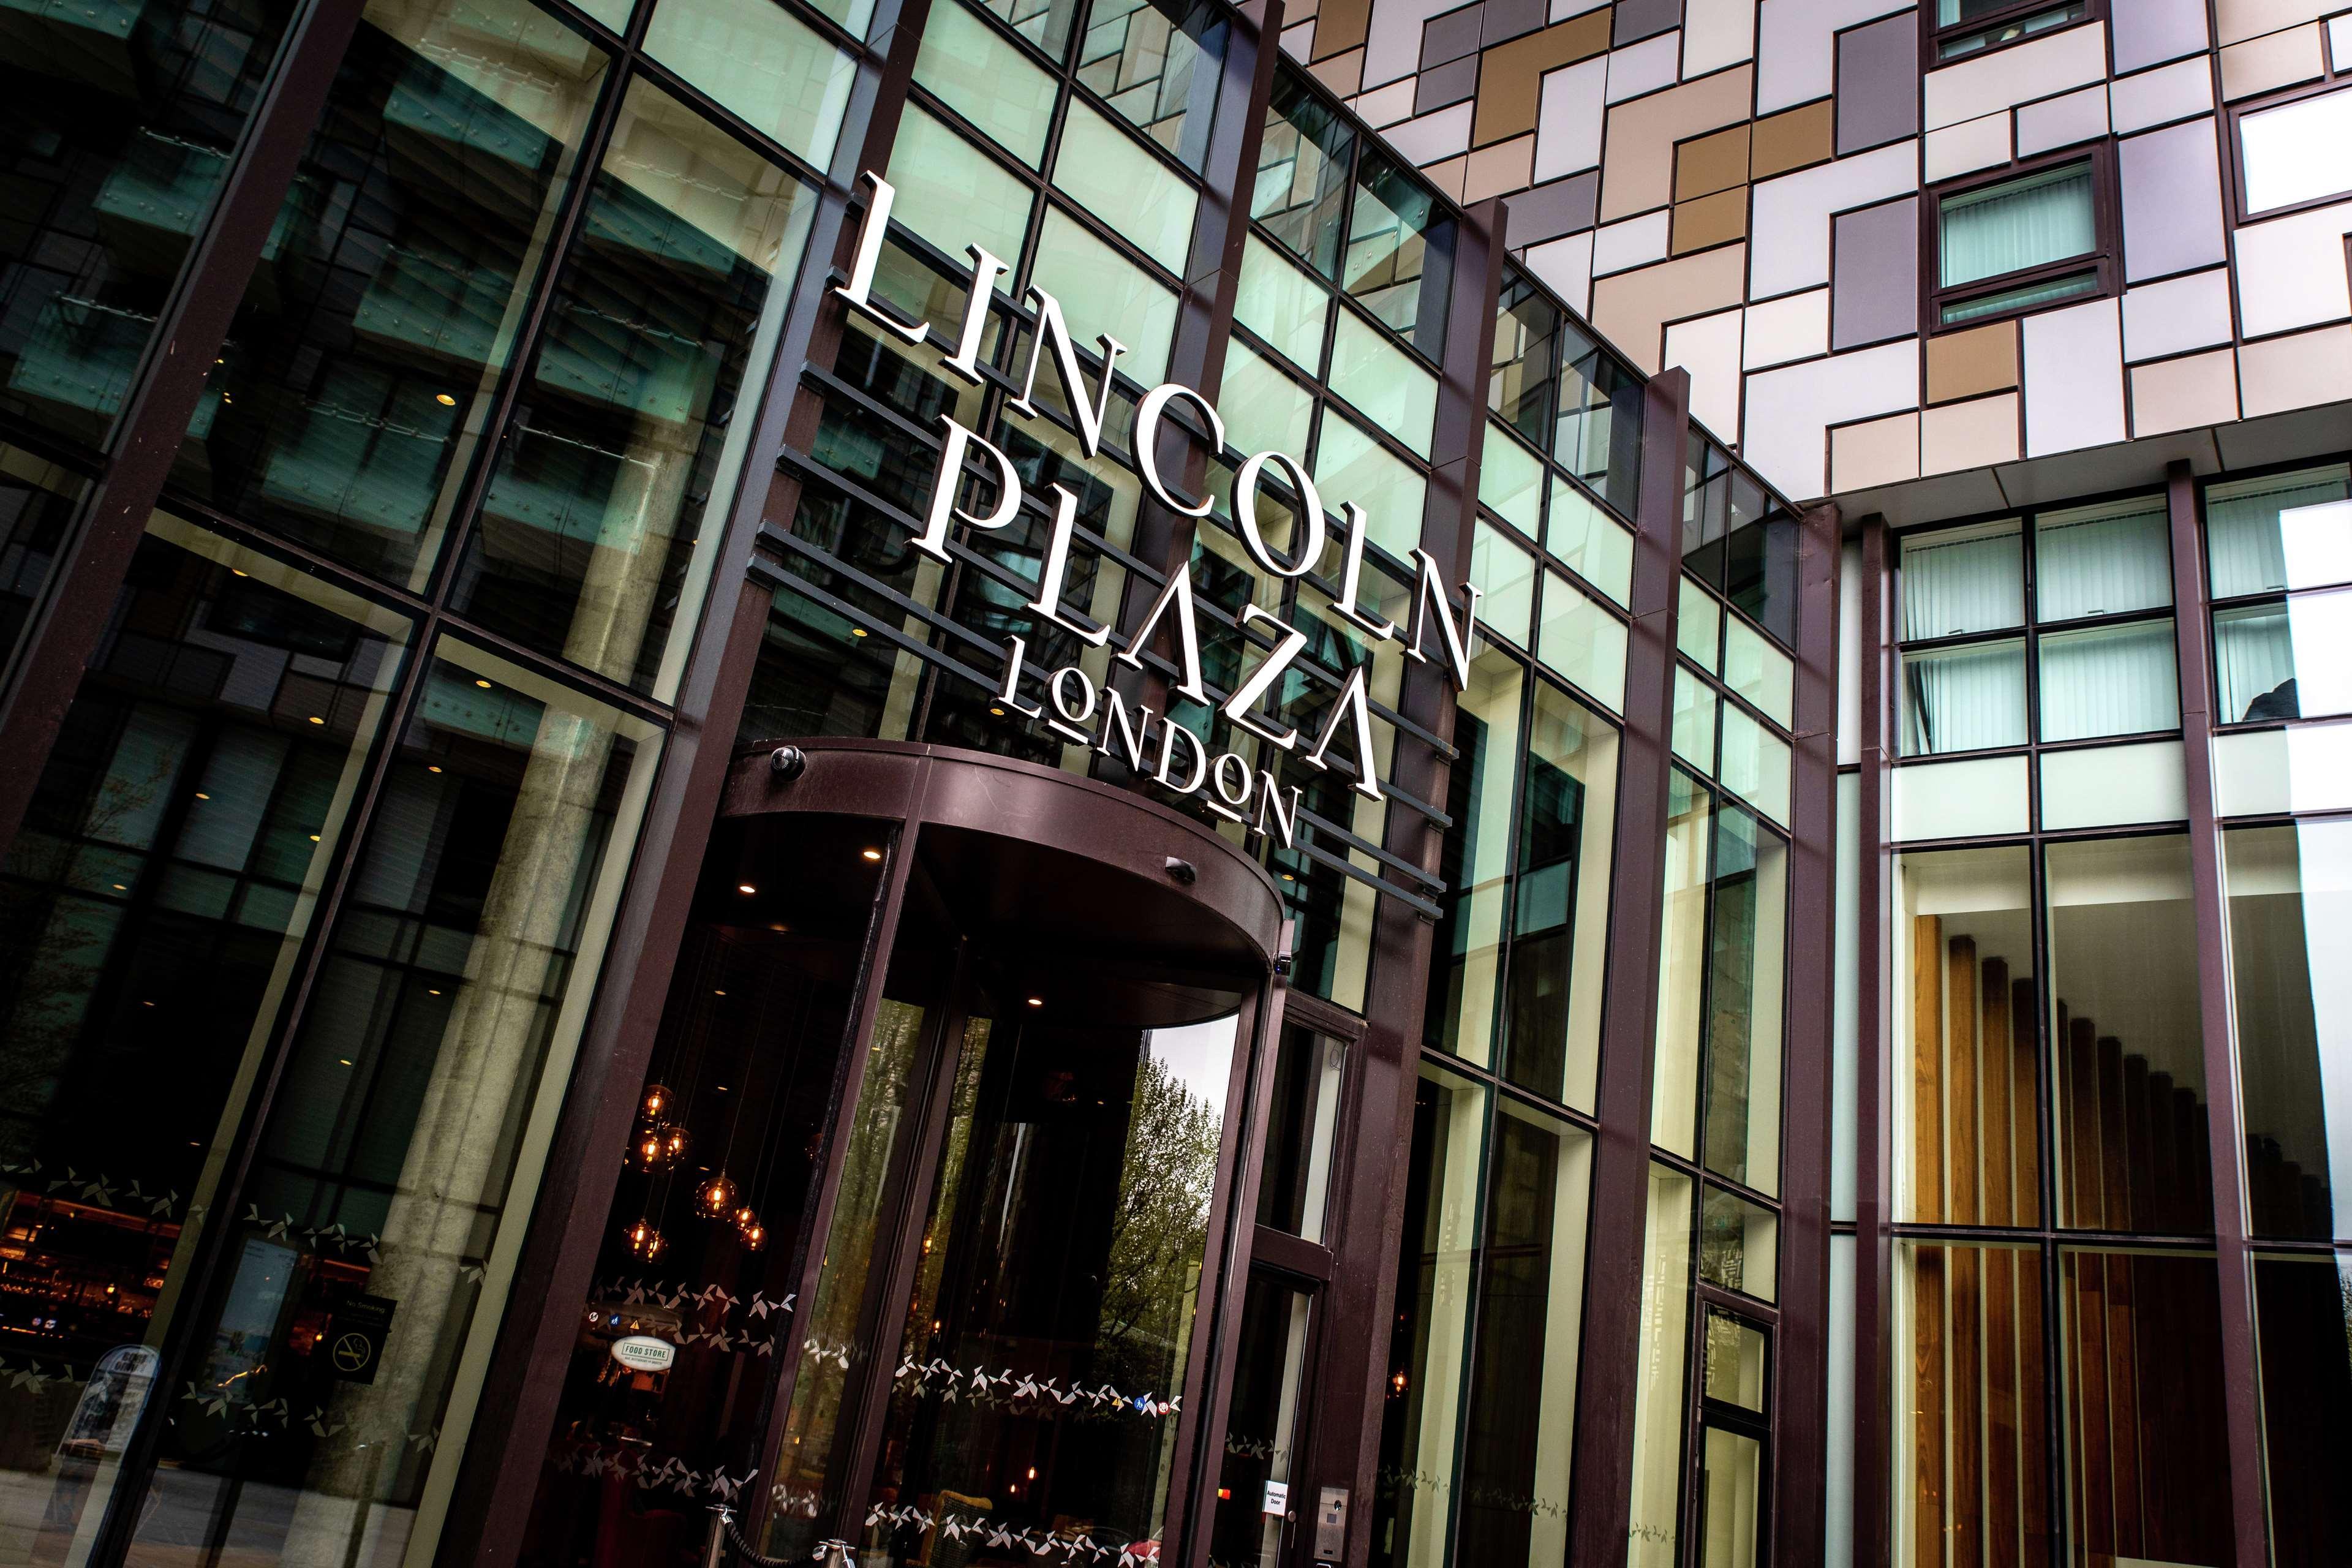 Hotel Lincoln Plaza London, Curio Collection By Hilton Exterior foto